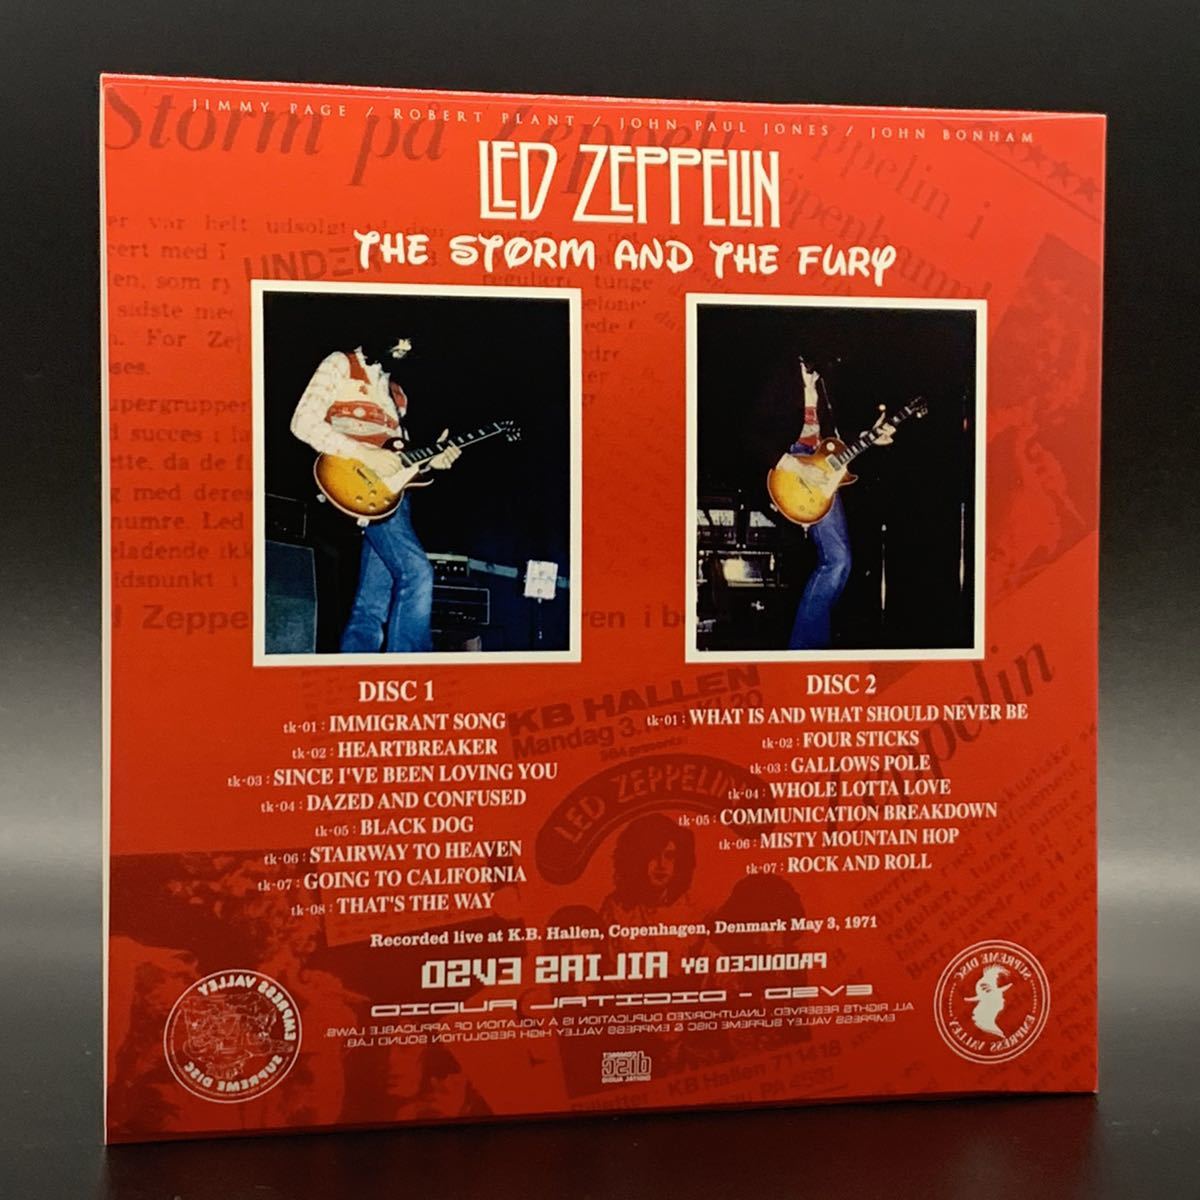 LED ZEPPELIN : THE STORM AND THE FURY 「嵐のレッド・ツェッペリン」 3CD 工場プレス銀盤CD ■欧米輸入限定盤_画像4